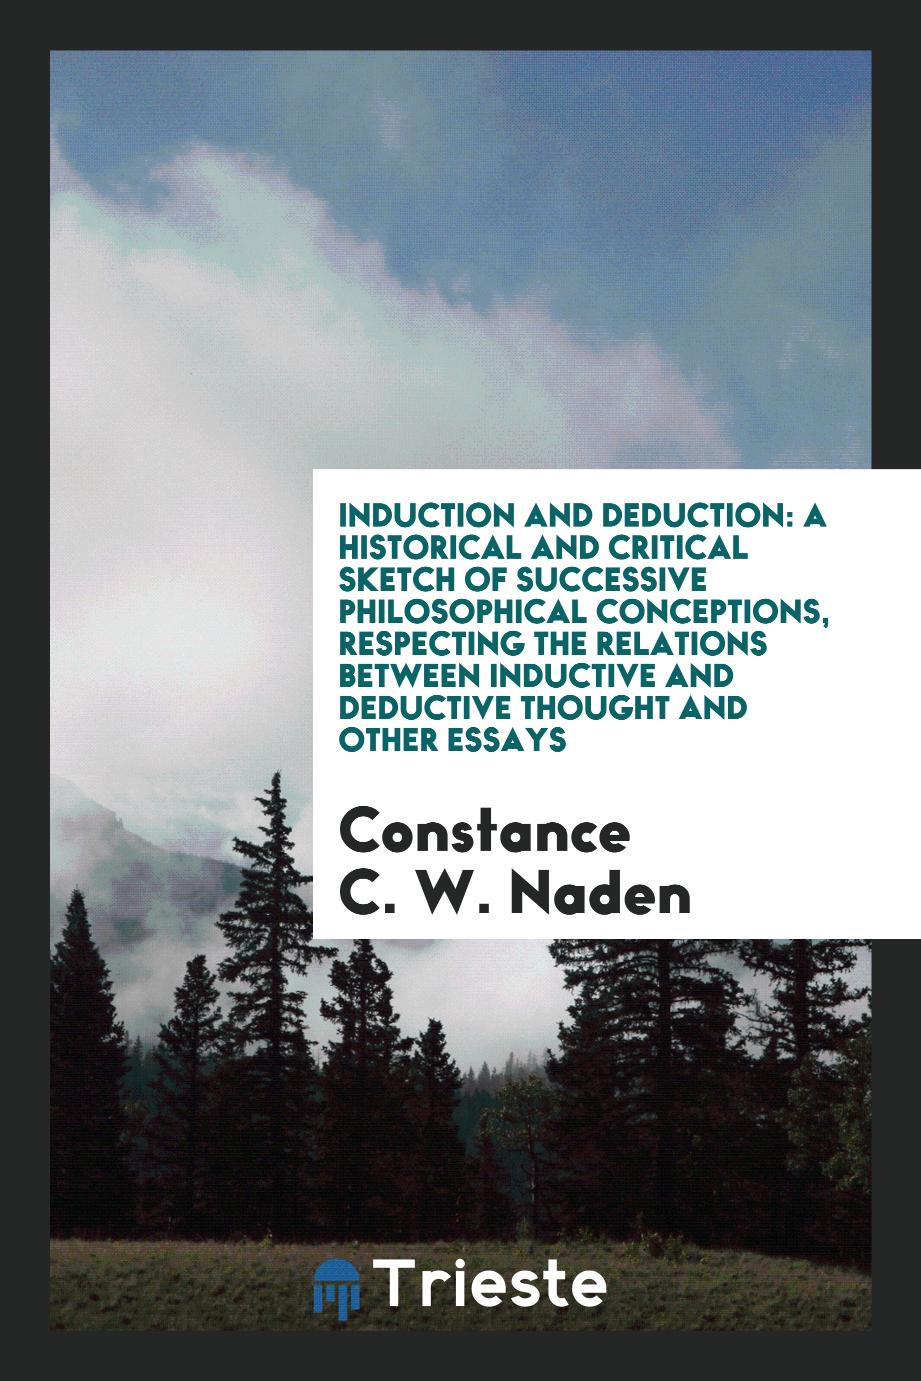 Induction and Deduction: A Historical and Critical Sketch of Successive Philosophical Conceptions, Respecting the Relations between Inductive and Deductive Thought and Other Essays